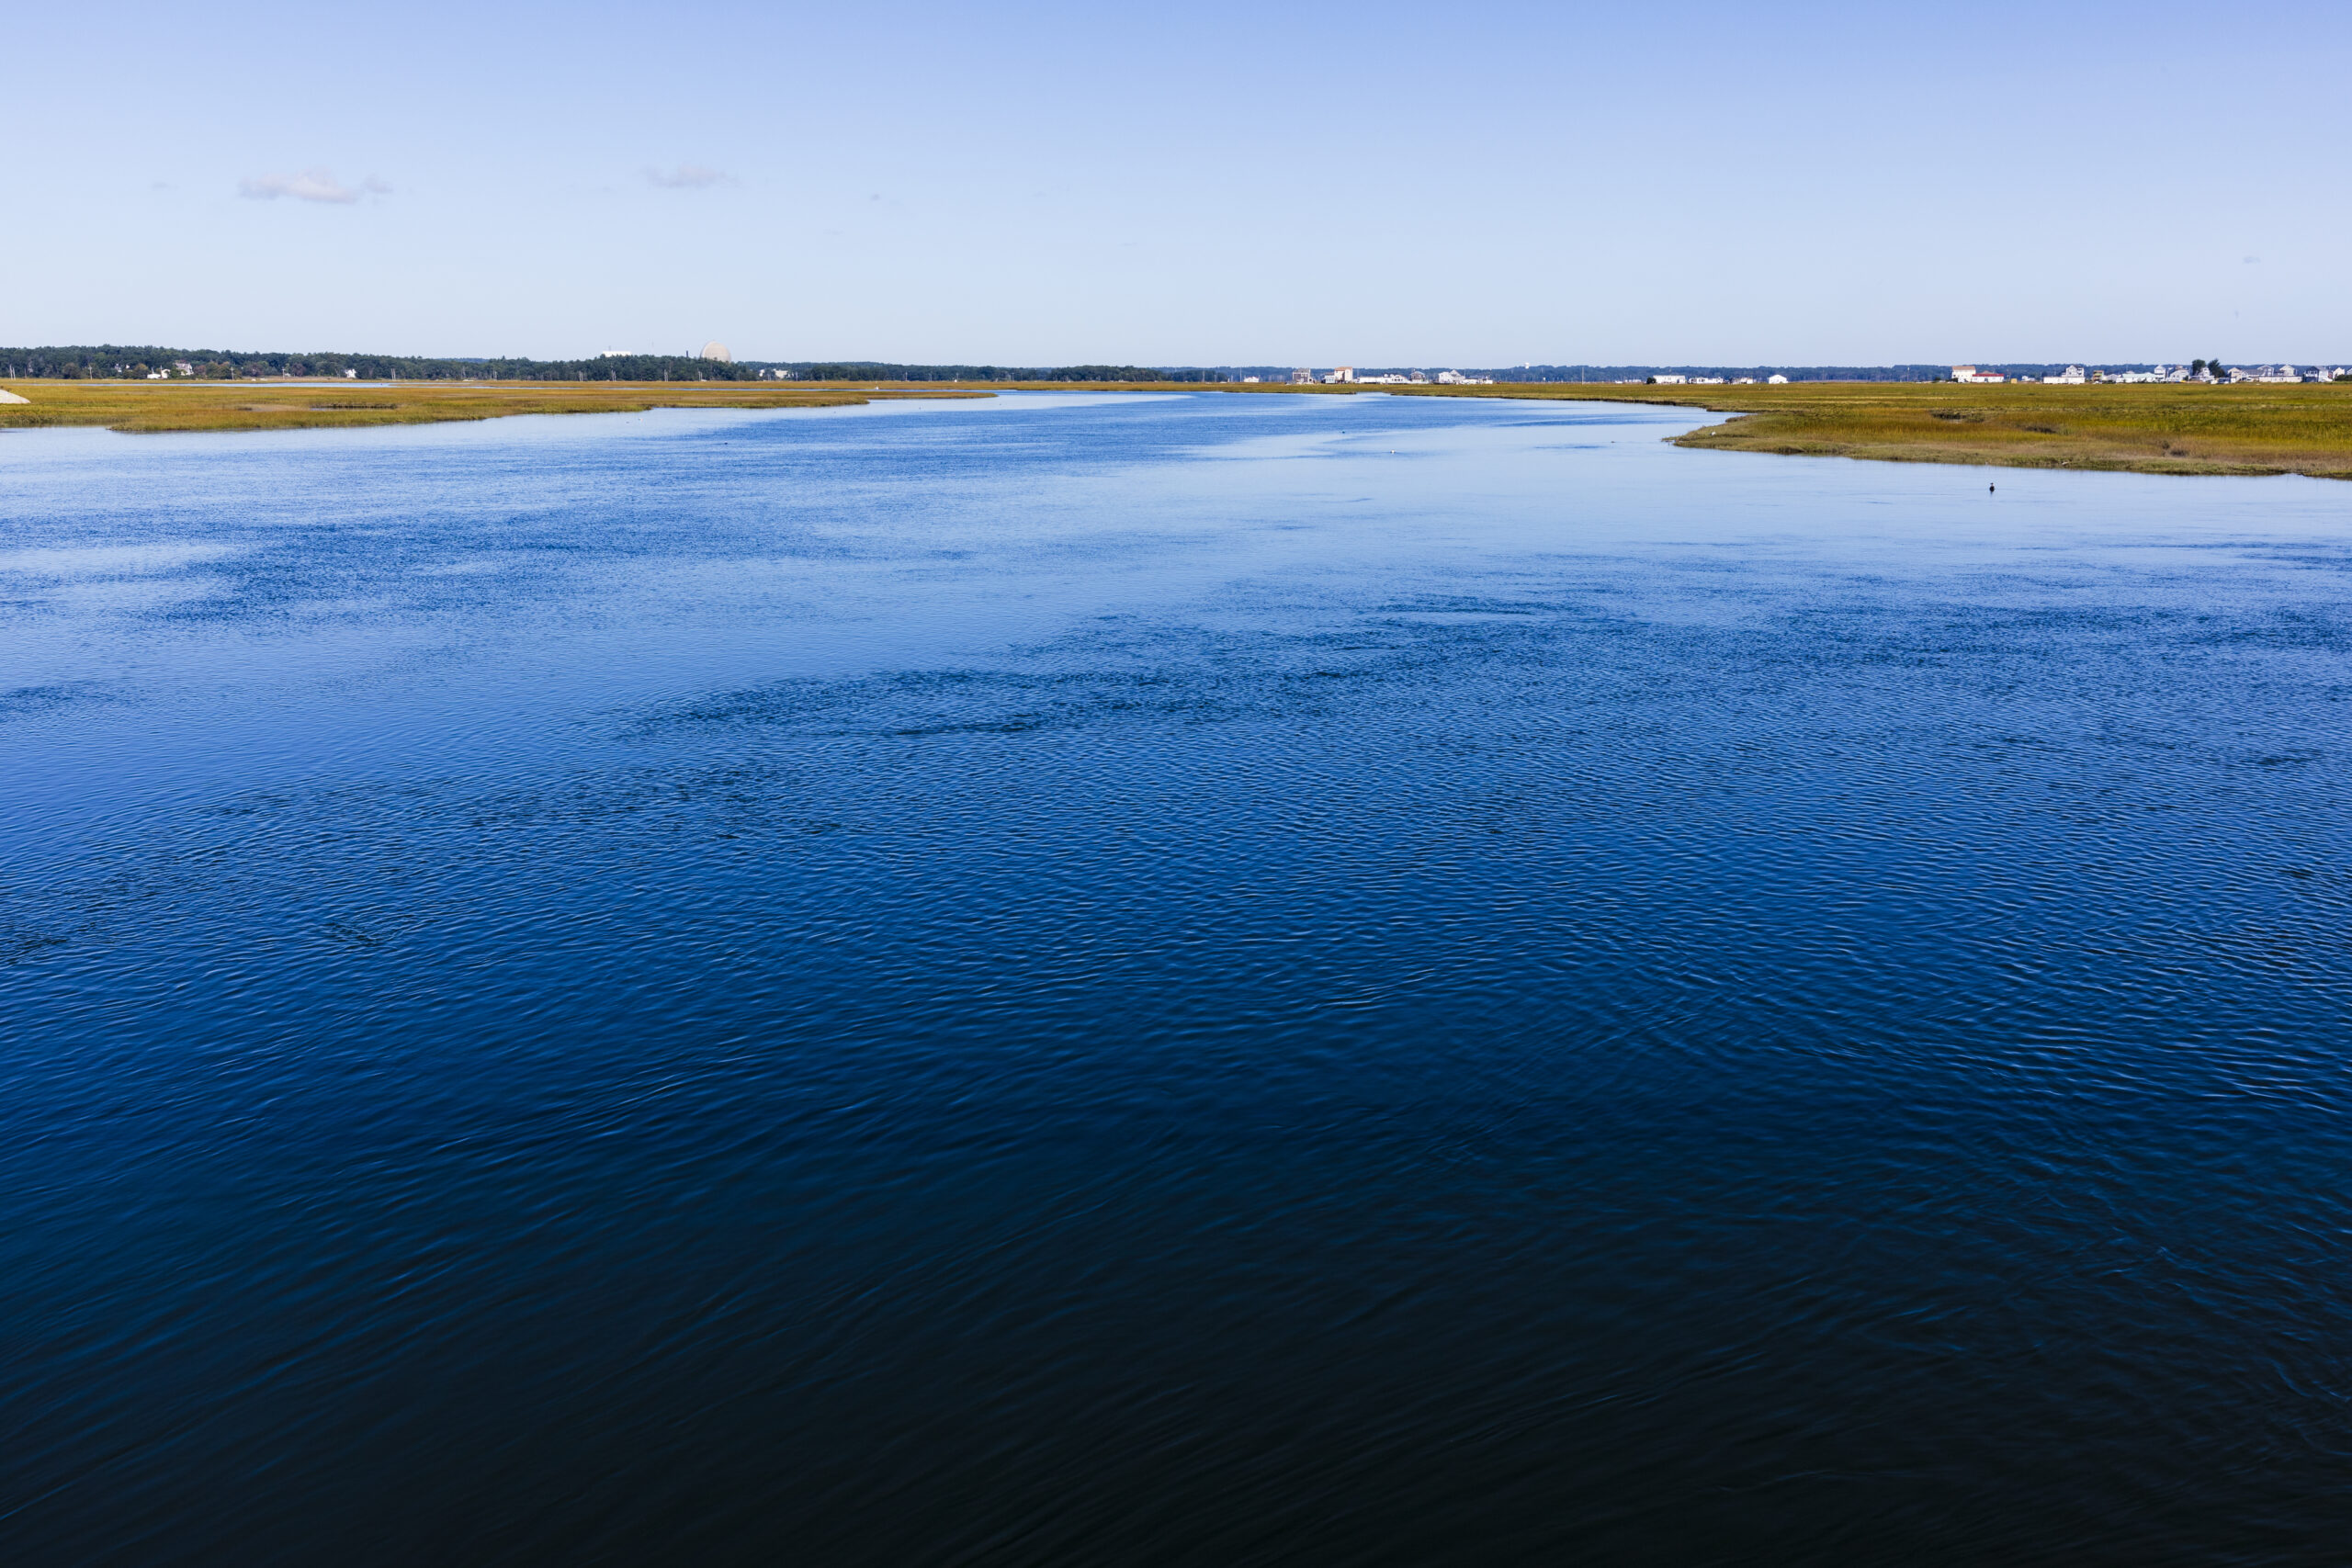 View across the water of the Hampton-Seabrook Estuary. Credit: Jerry Monkman.